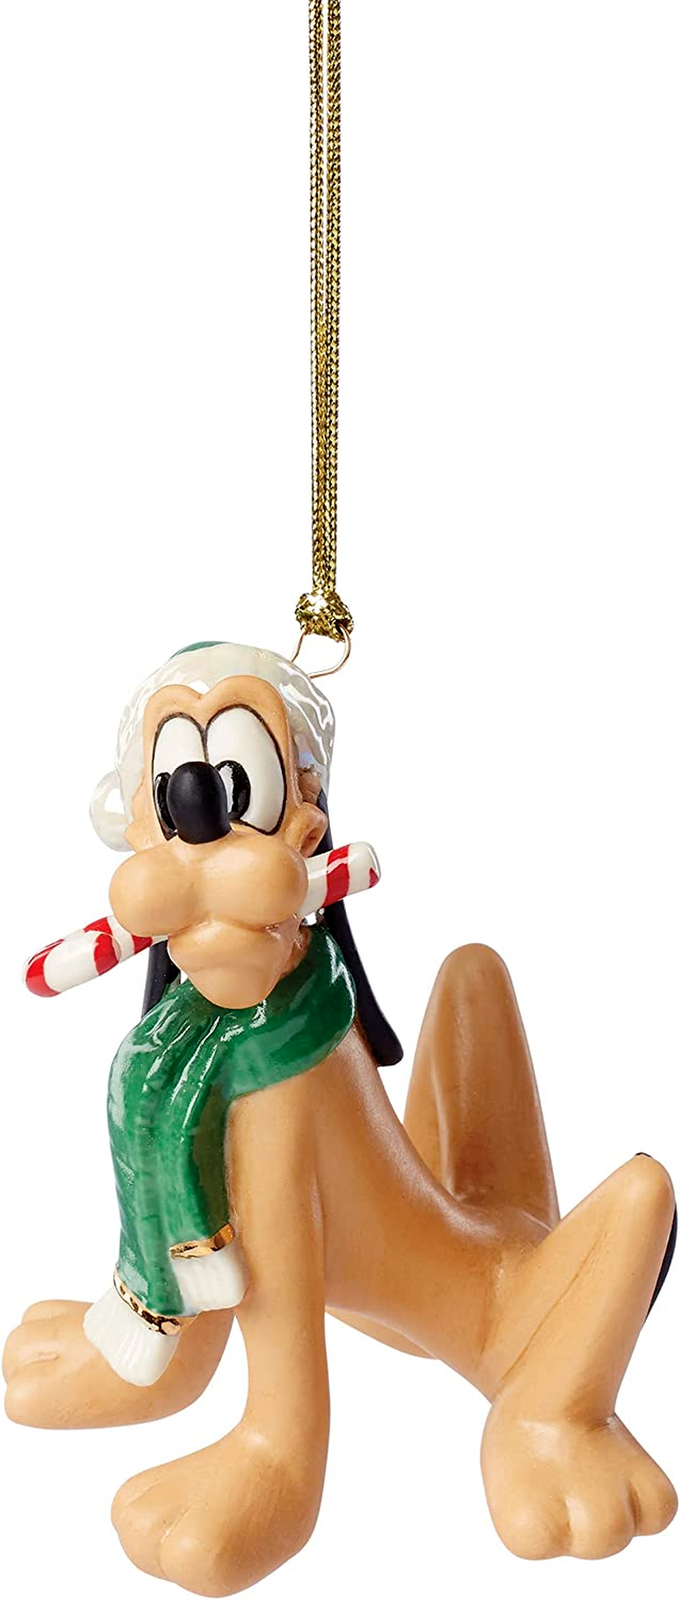 Primary image for Lenox Disney Pluto Figurine Ornament Mickey's Dog Candy Cane Treat Christmas NEW